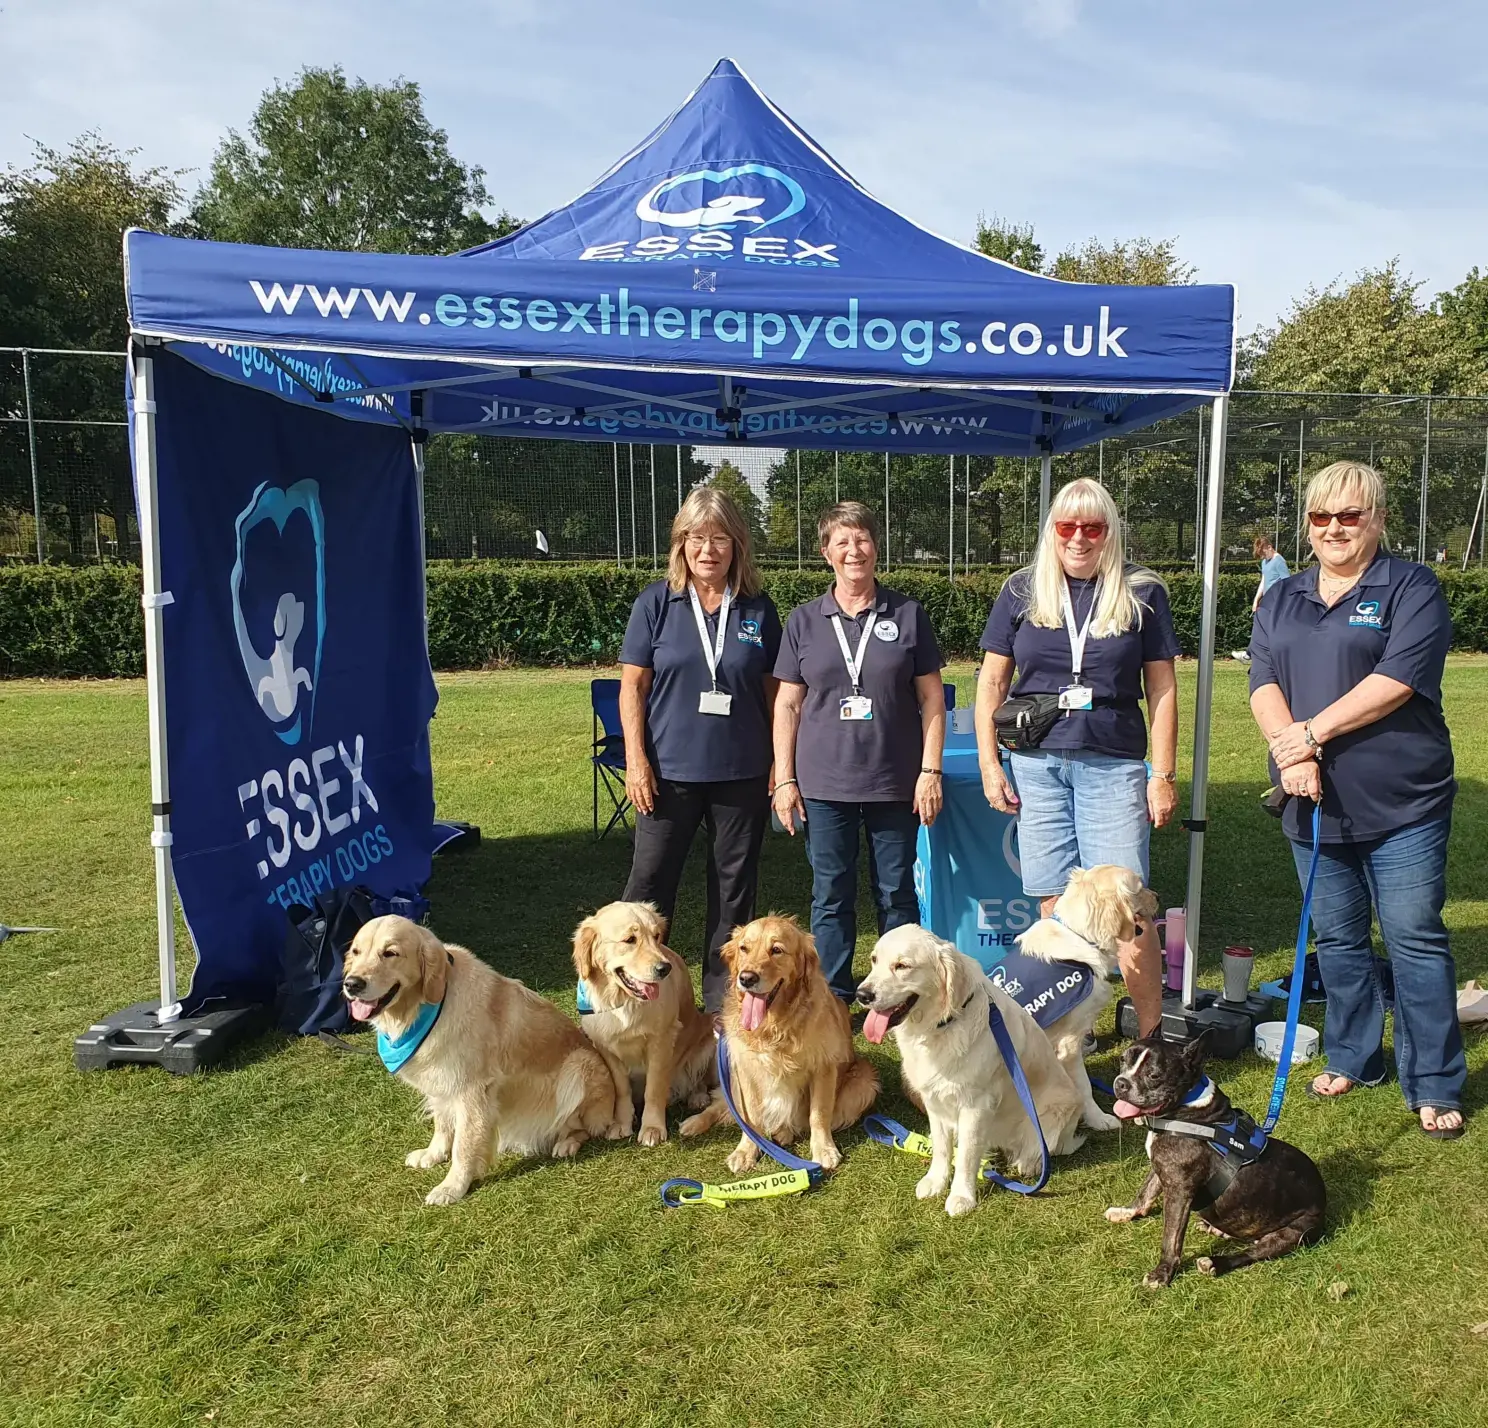 Six Dogs And Four Humans From Essex Therapy Dogs Are Pictured At Their Event Gazebo